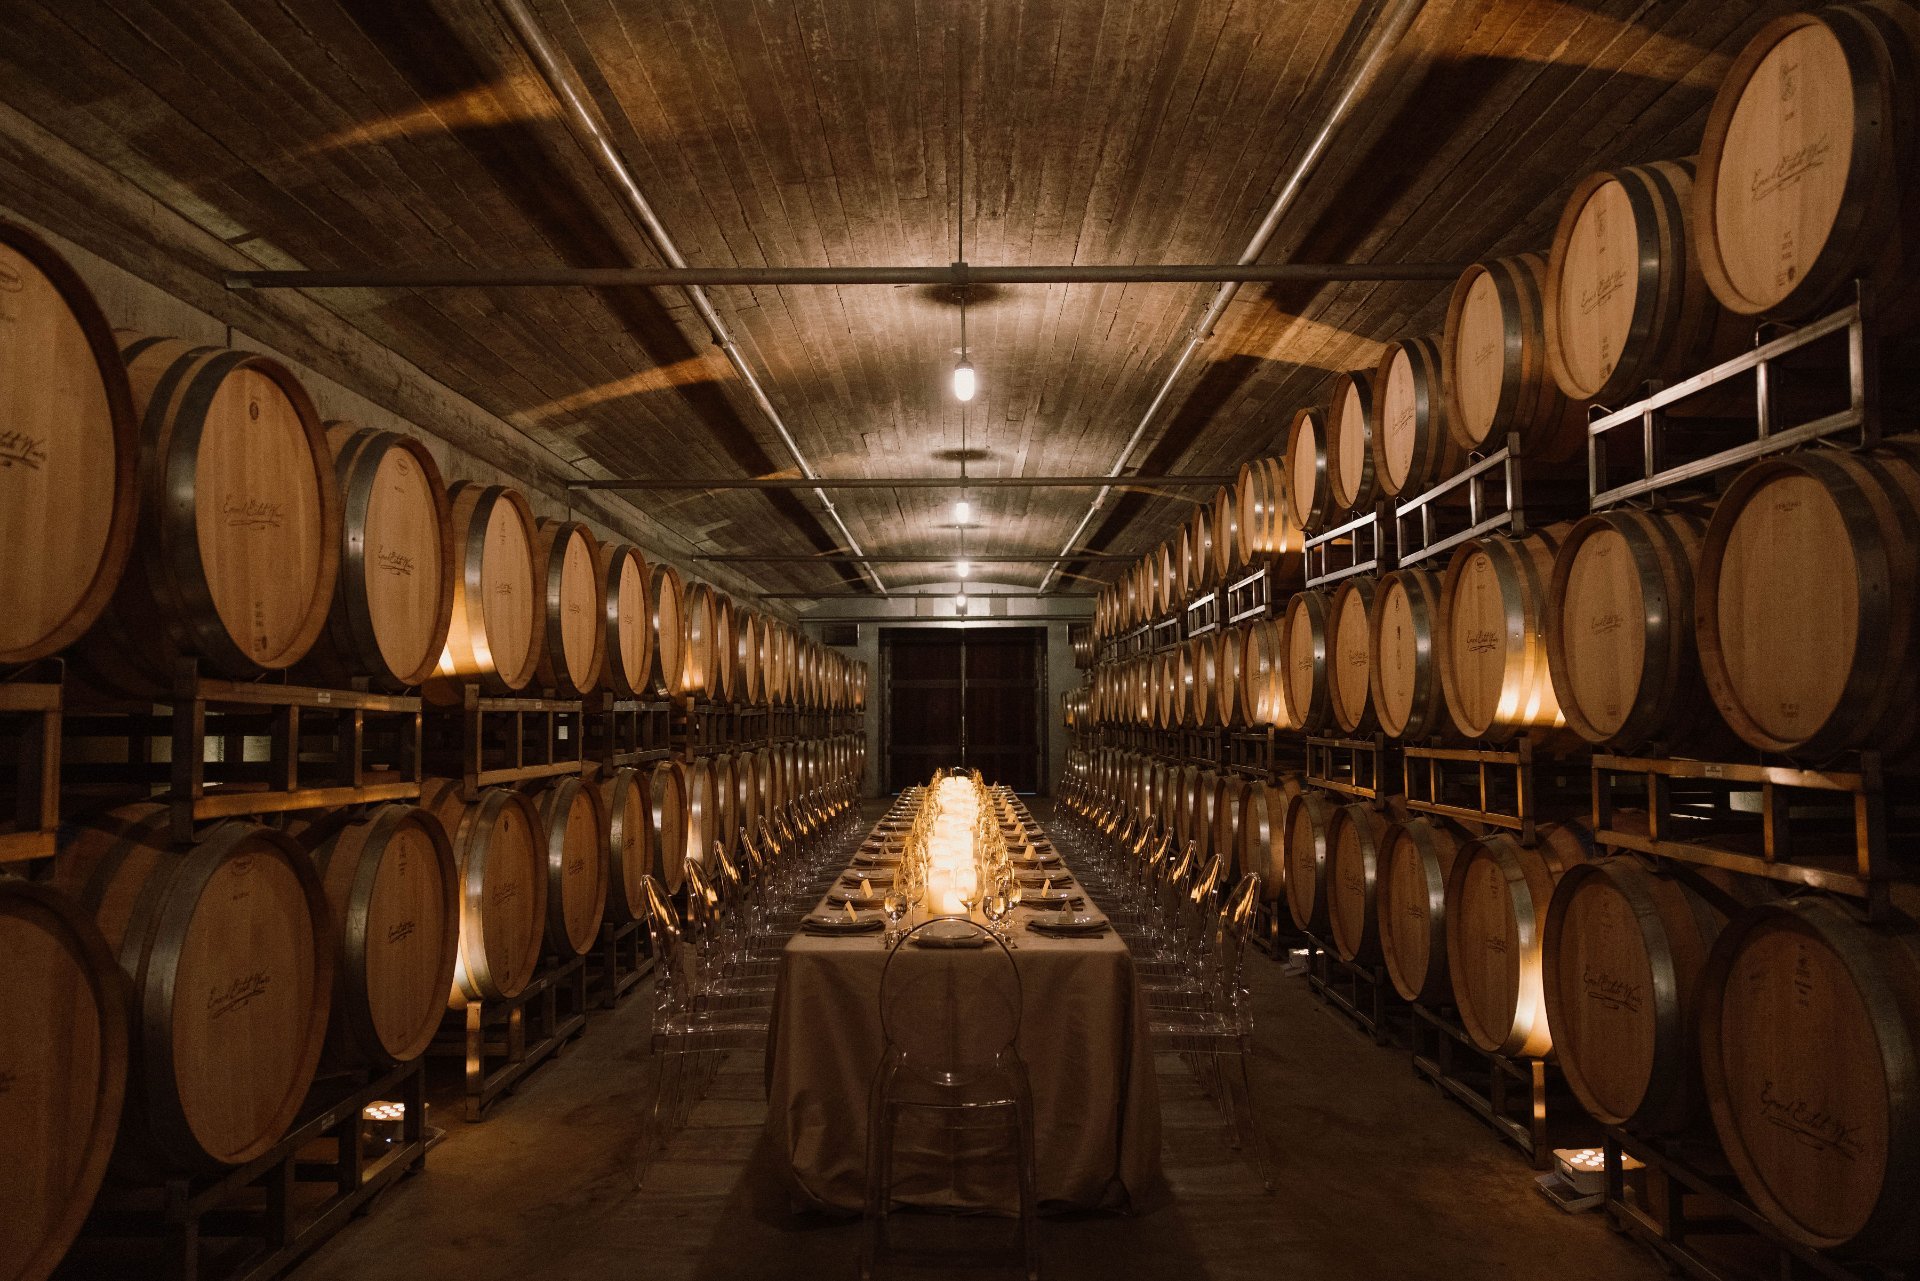 Wine Cellar Candle Lit Rehearsal Dinner | Event Lighting by RENOWNED.jpg